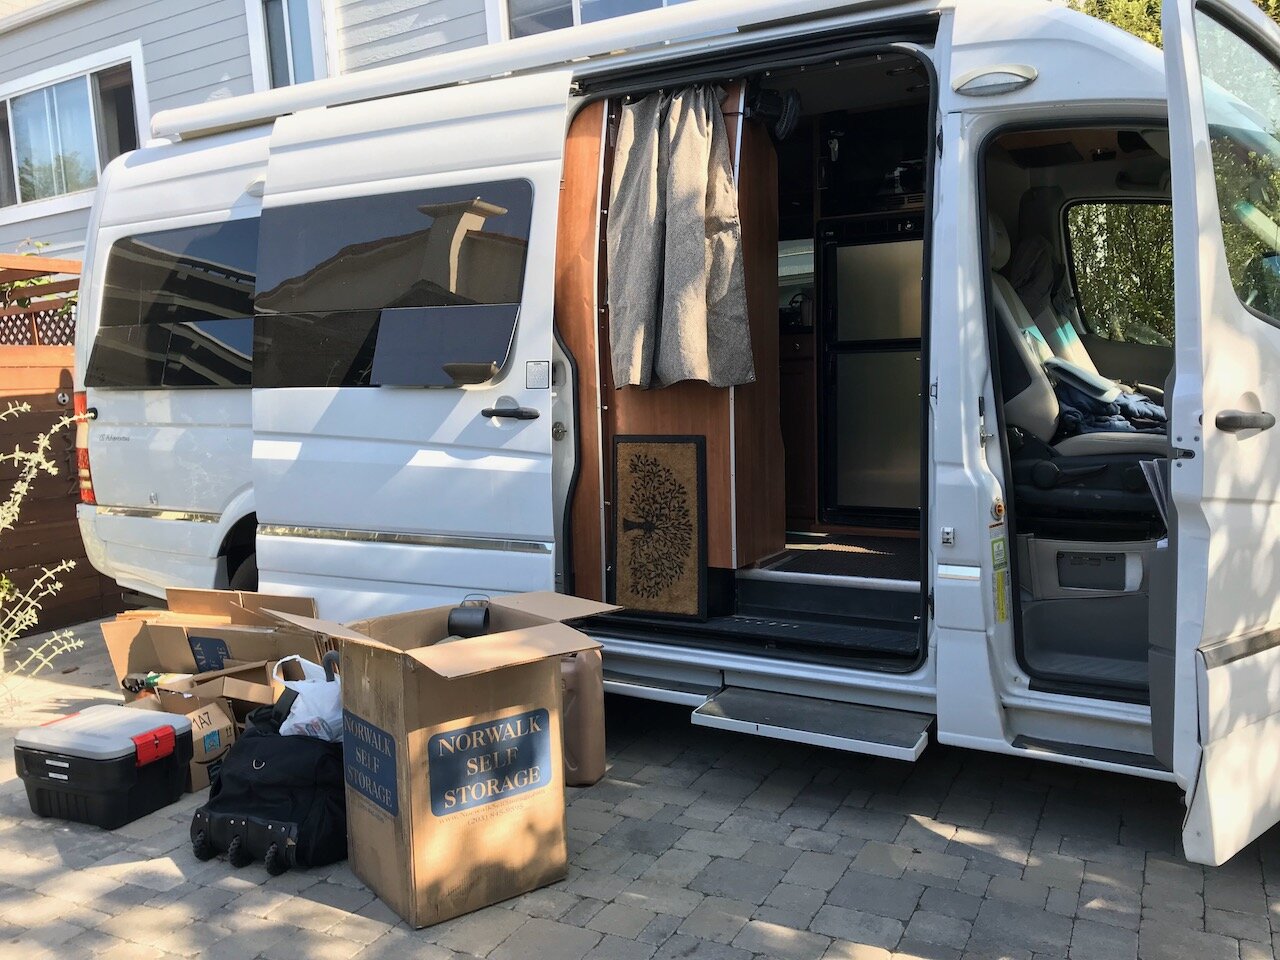  Moving into our RV while parked at a friend’s home in Studio City, CA. 5/22/18 